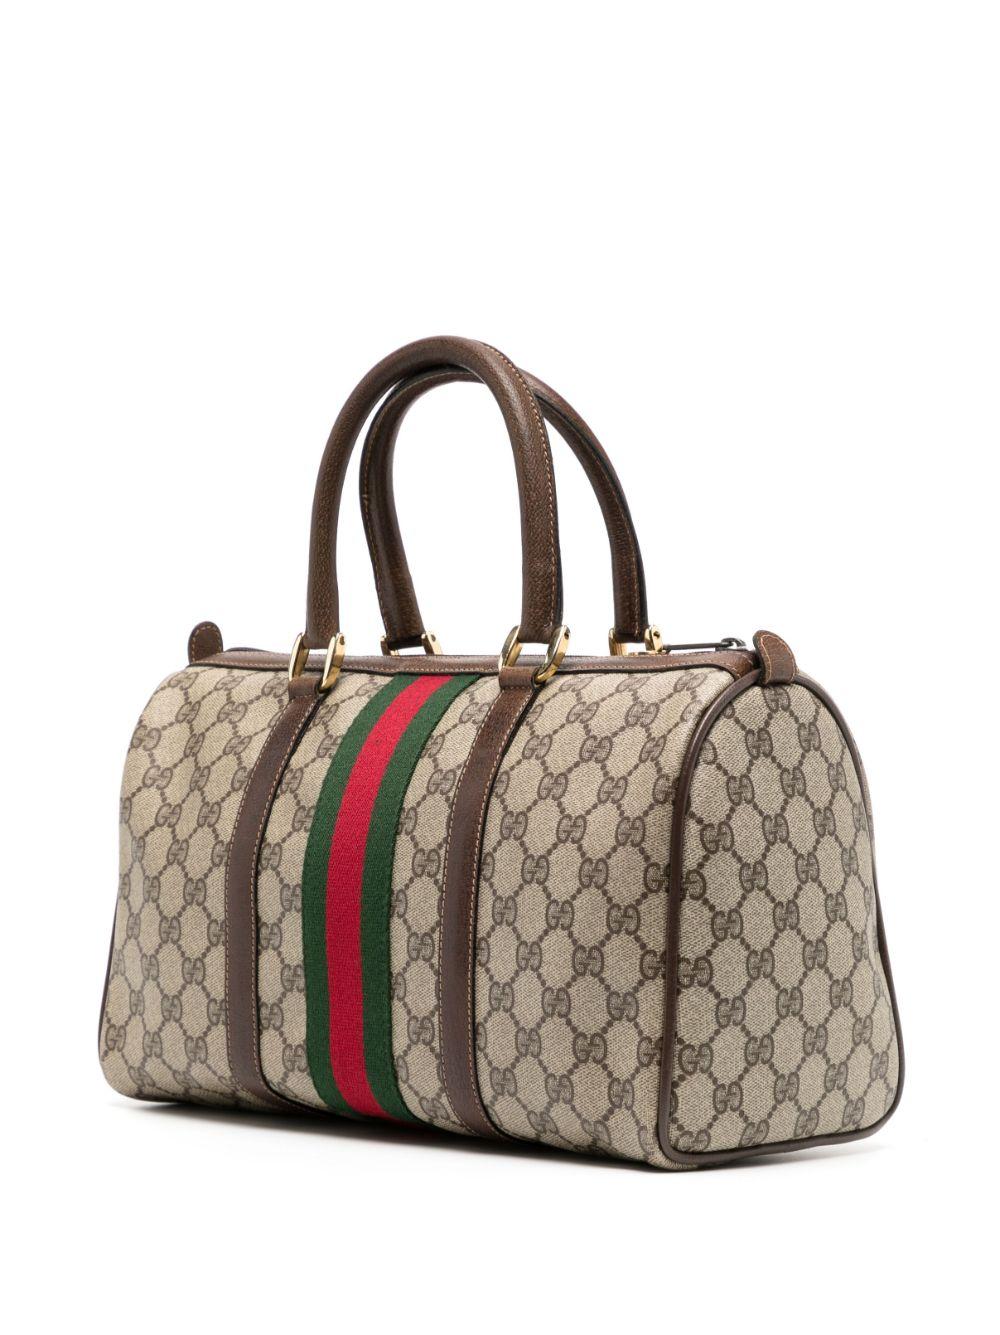 This Boston bag by Gucci is crafted from canvas with leather details and handles featuring the classic GG print in light grey and brown. This top handle style with the oblong bottom is enclosed with a zip and finished with golden-tone hardware.